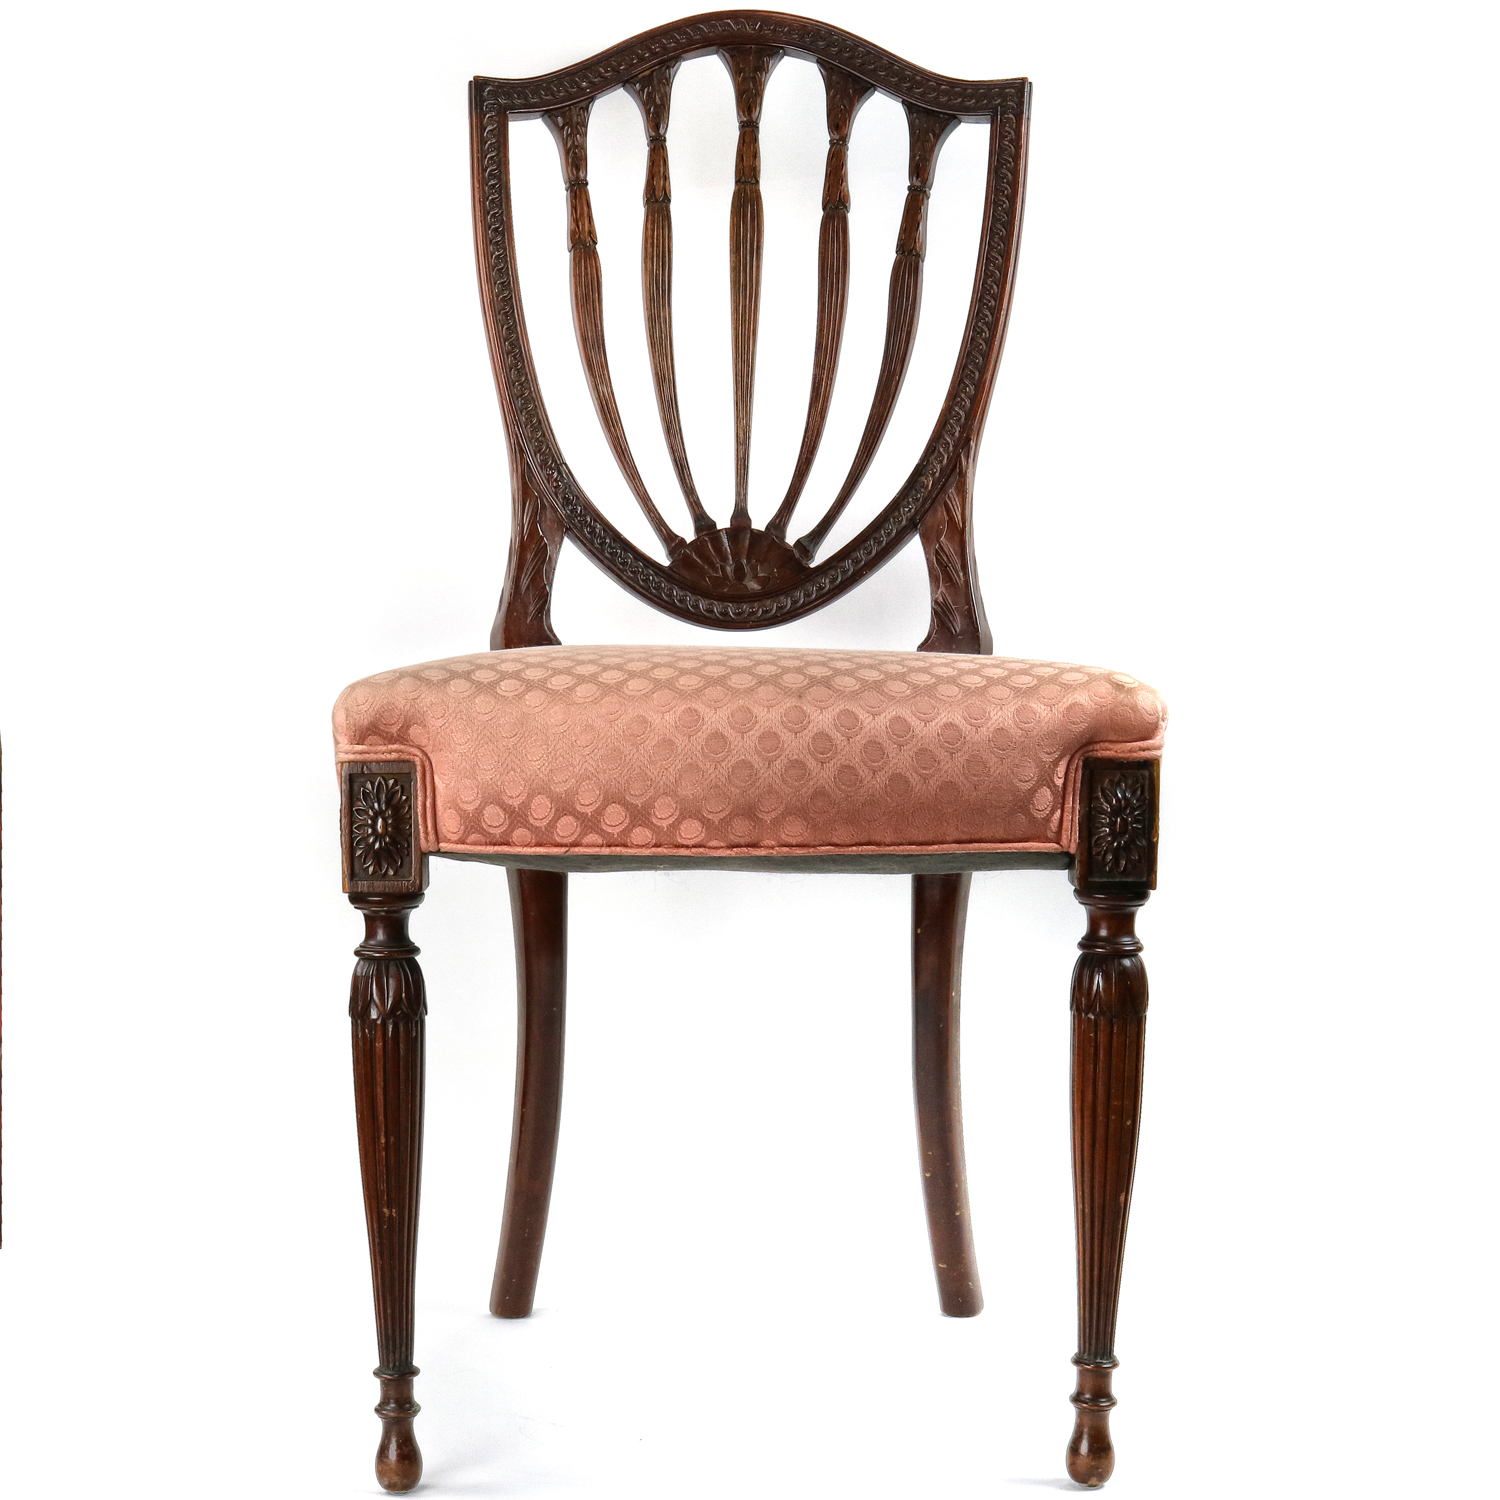 A FEDERAL STYLE MAHOGANY CHAIR 3a6519